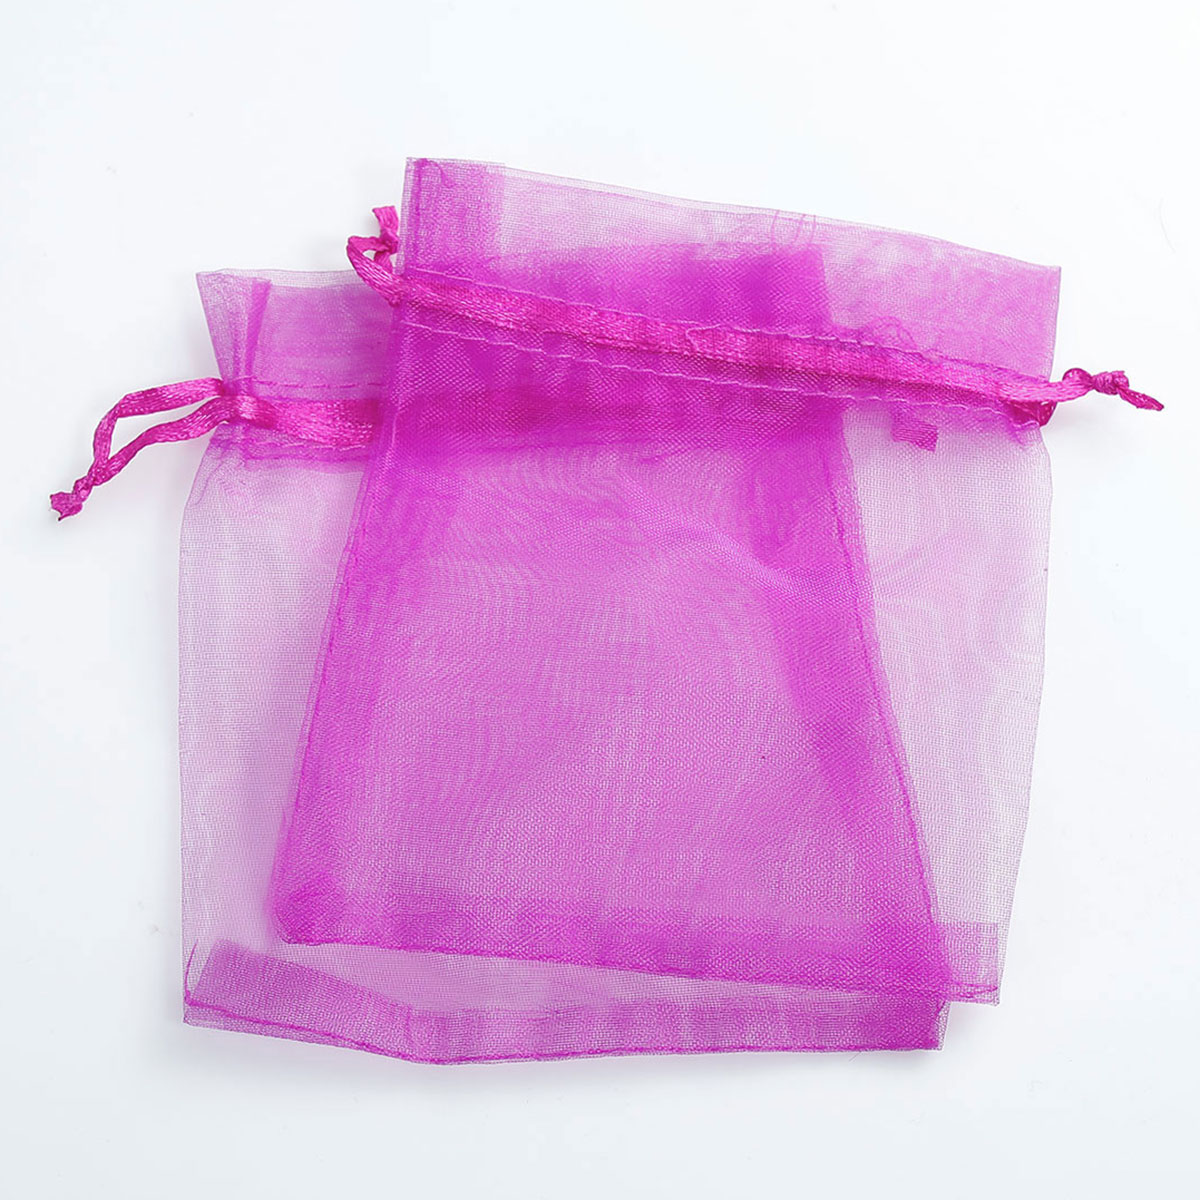 Picture of Wedding Gift Organza Jewelry Bags Drawable Rectangle Fuchsia 12cm x9cm(4 6/8" x3 4/8"), 100 PCs